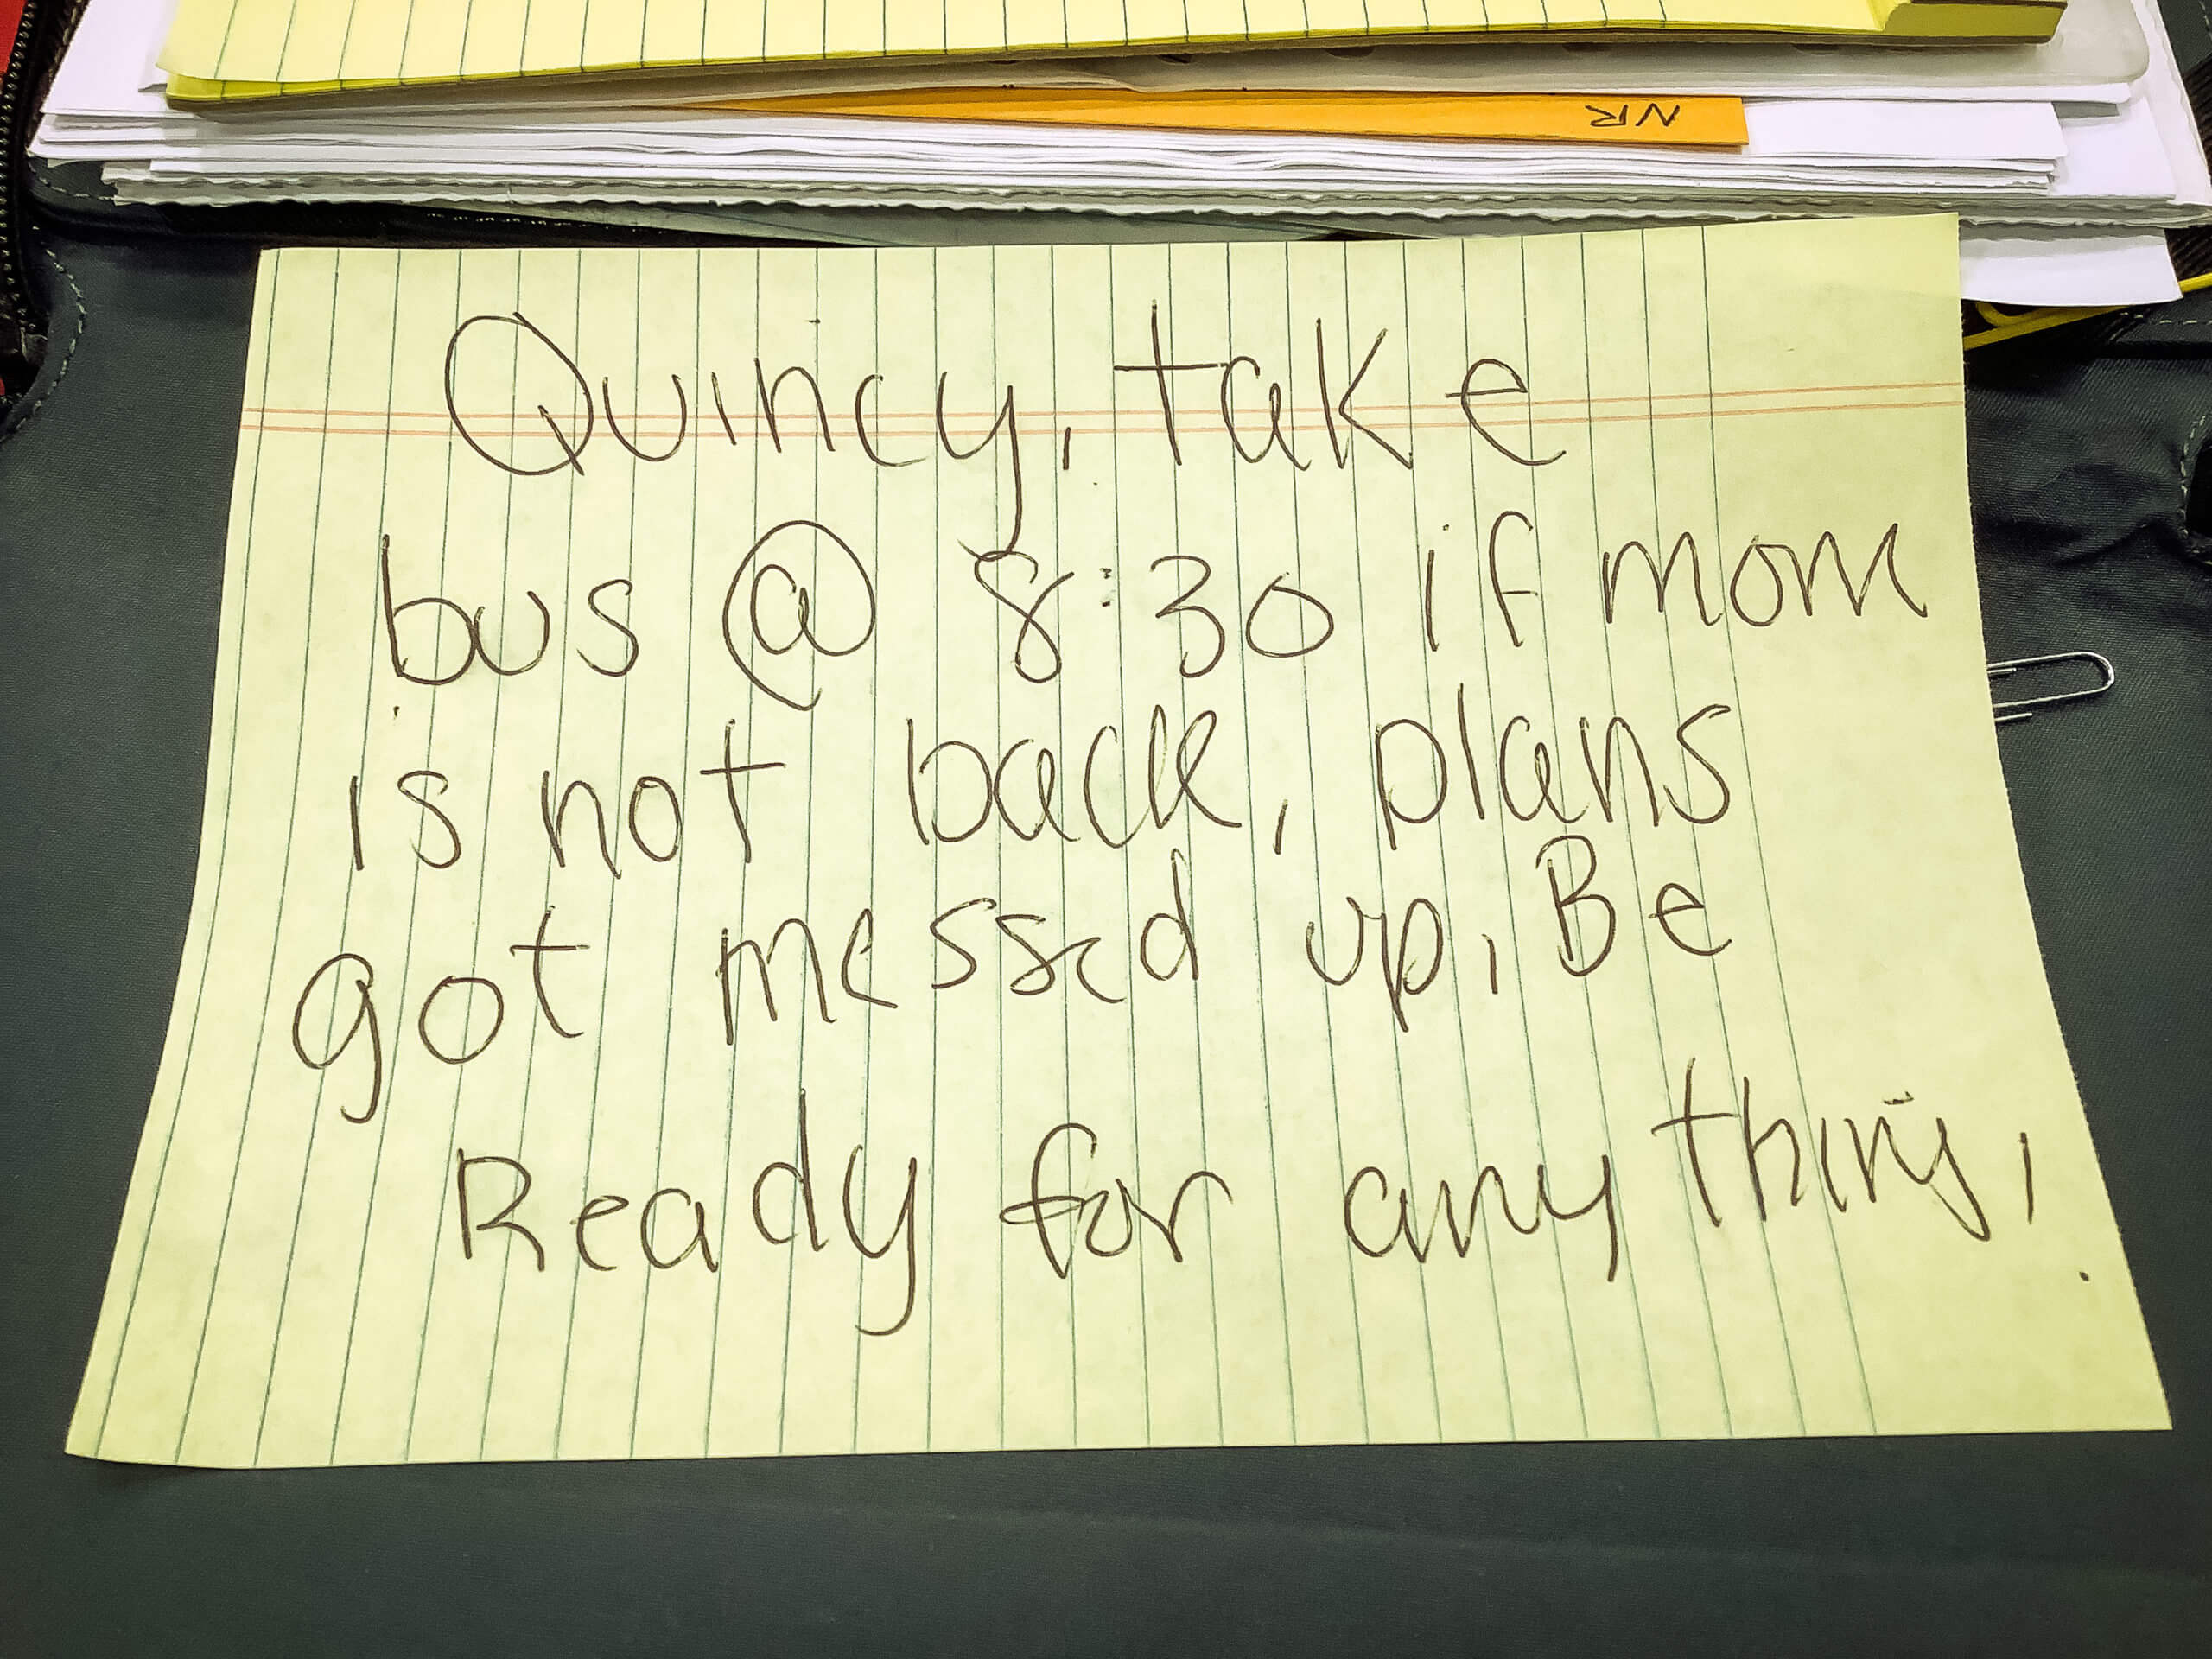 A piece of paper with a handwritten note. The note reads "Quincy, take bus @ 8:30 if mom is not back, plans got messed up, Be Ready for anything!"